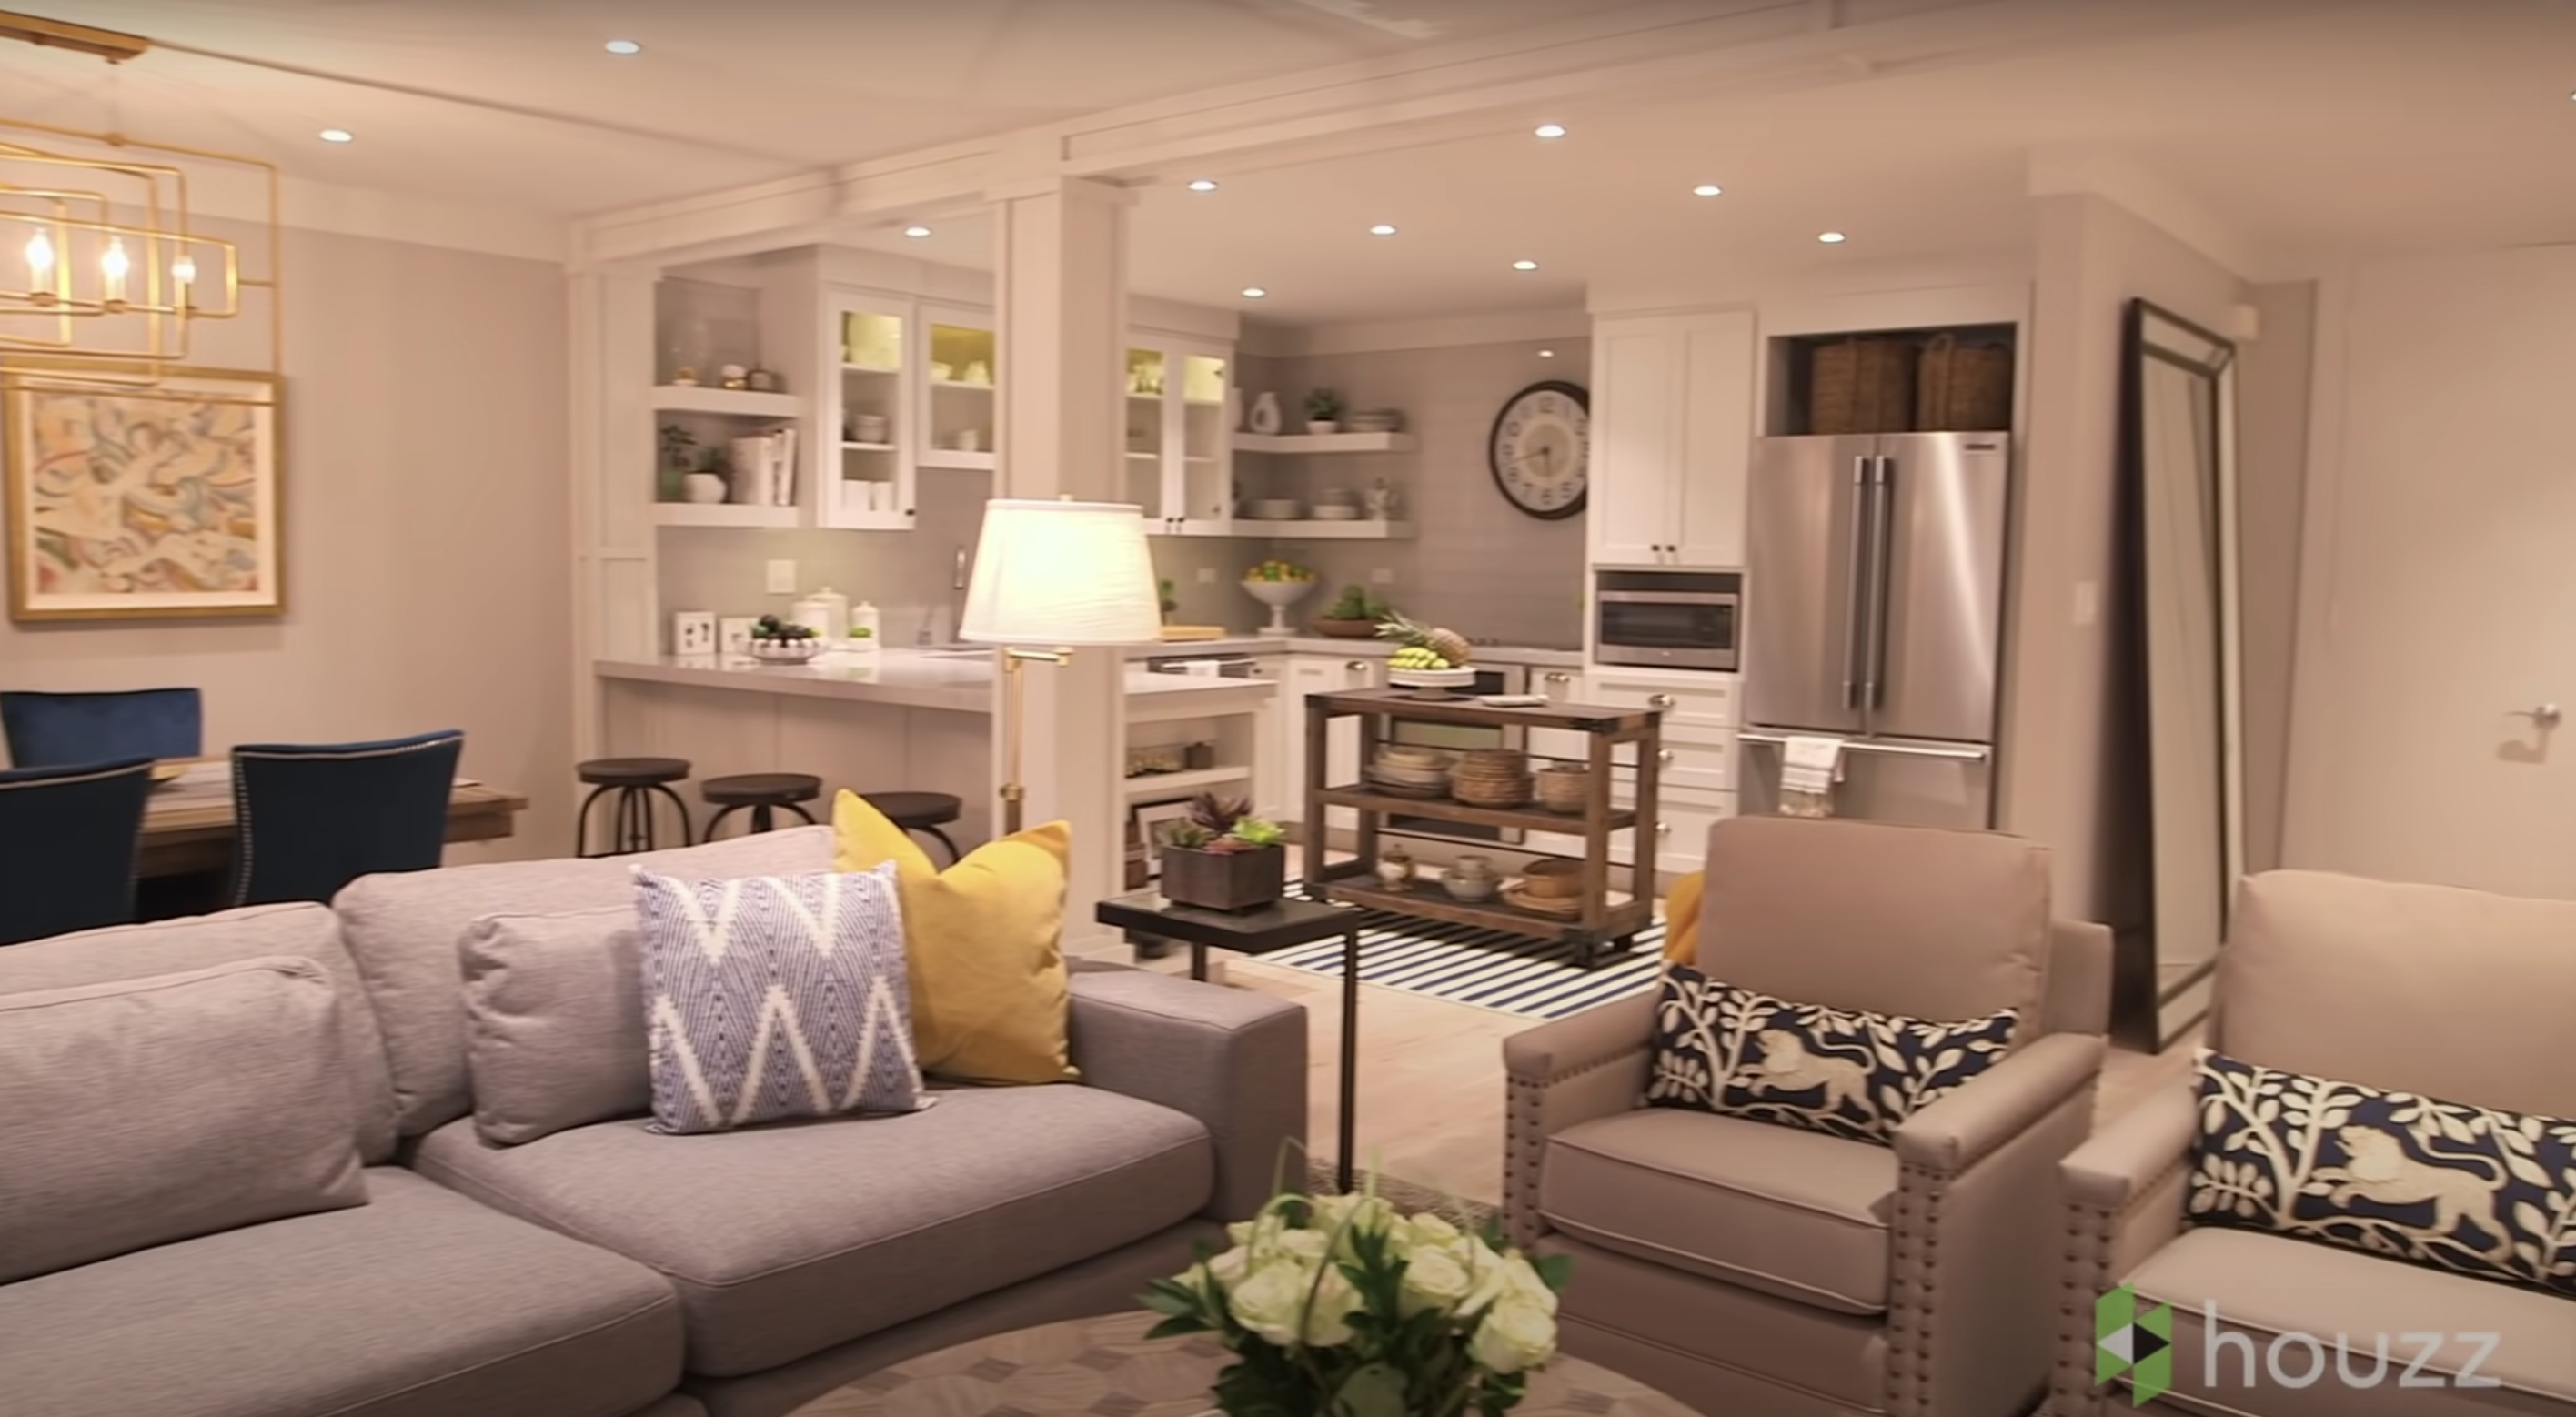 A photo showing the revamped living space and kitchen area of Mila Kunis' family condo | Source: Youtube.com/HouzzTV